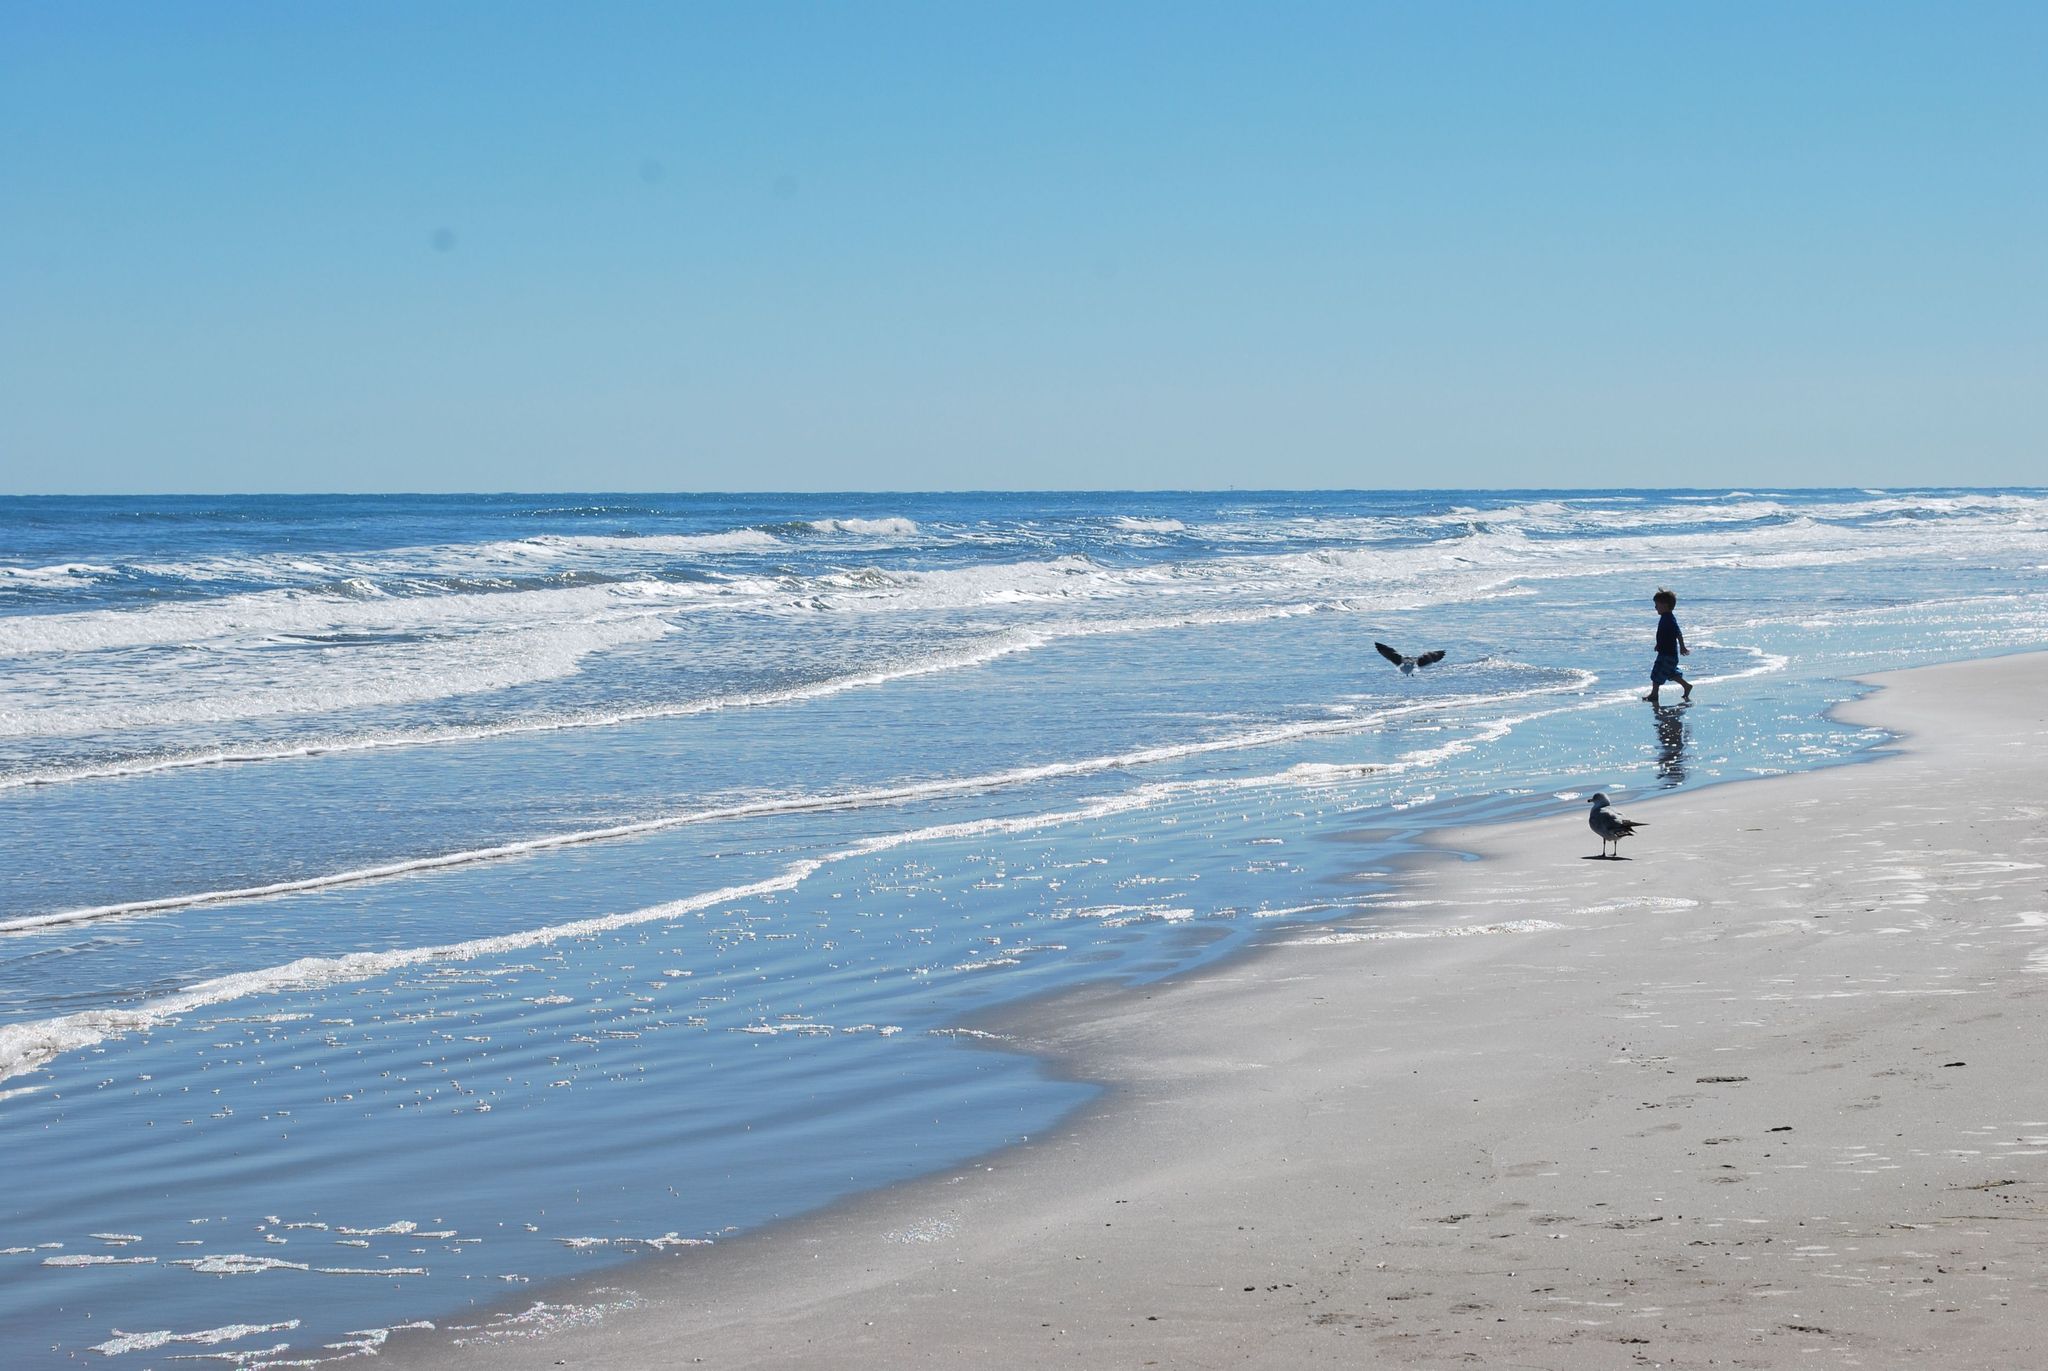 Over 60 miles of beach offers beautiful scenery and fun for the whole family.